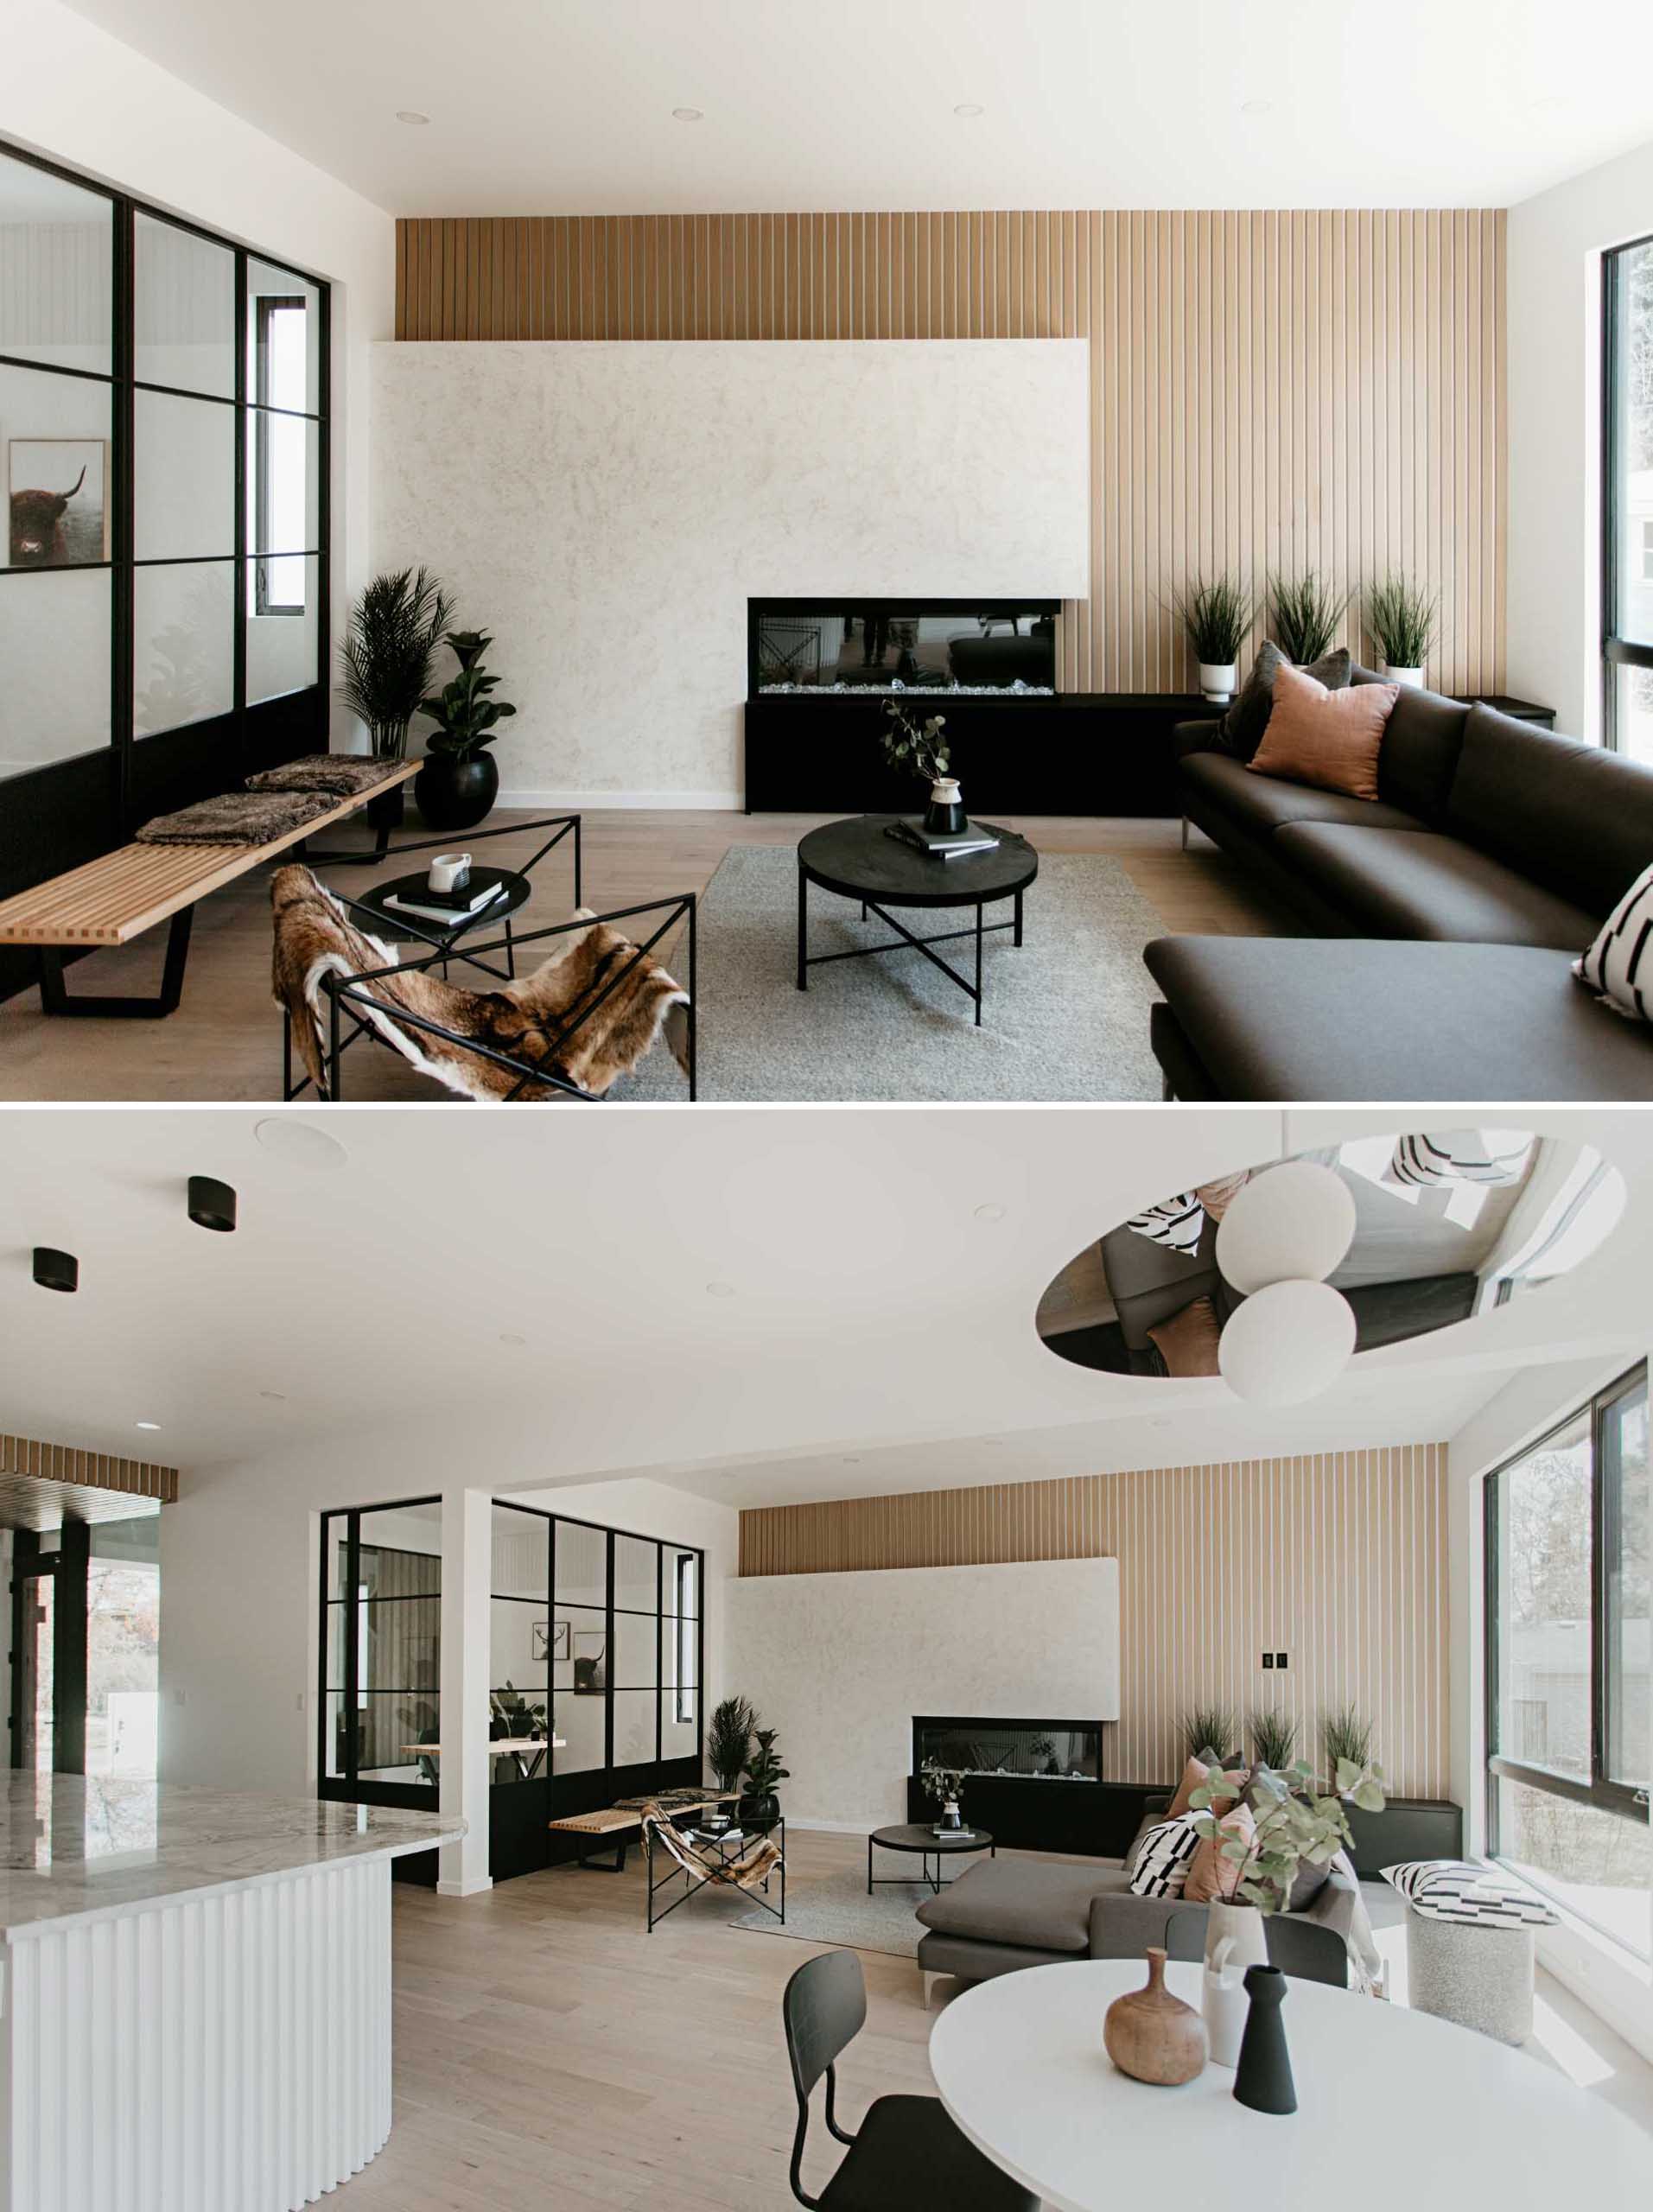 In this modern living room, there's an accent wall of wood slats, a fireplace, and black cabinets, while a section of interior windows provides a view of the home office.